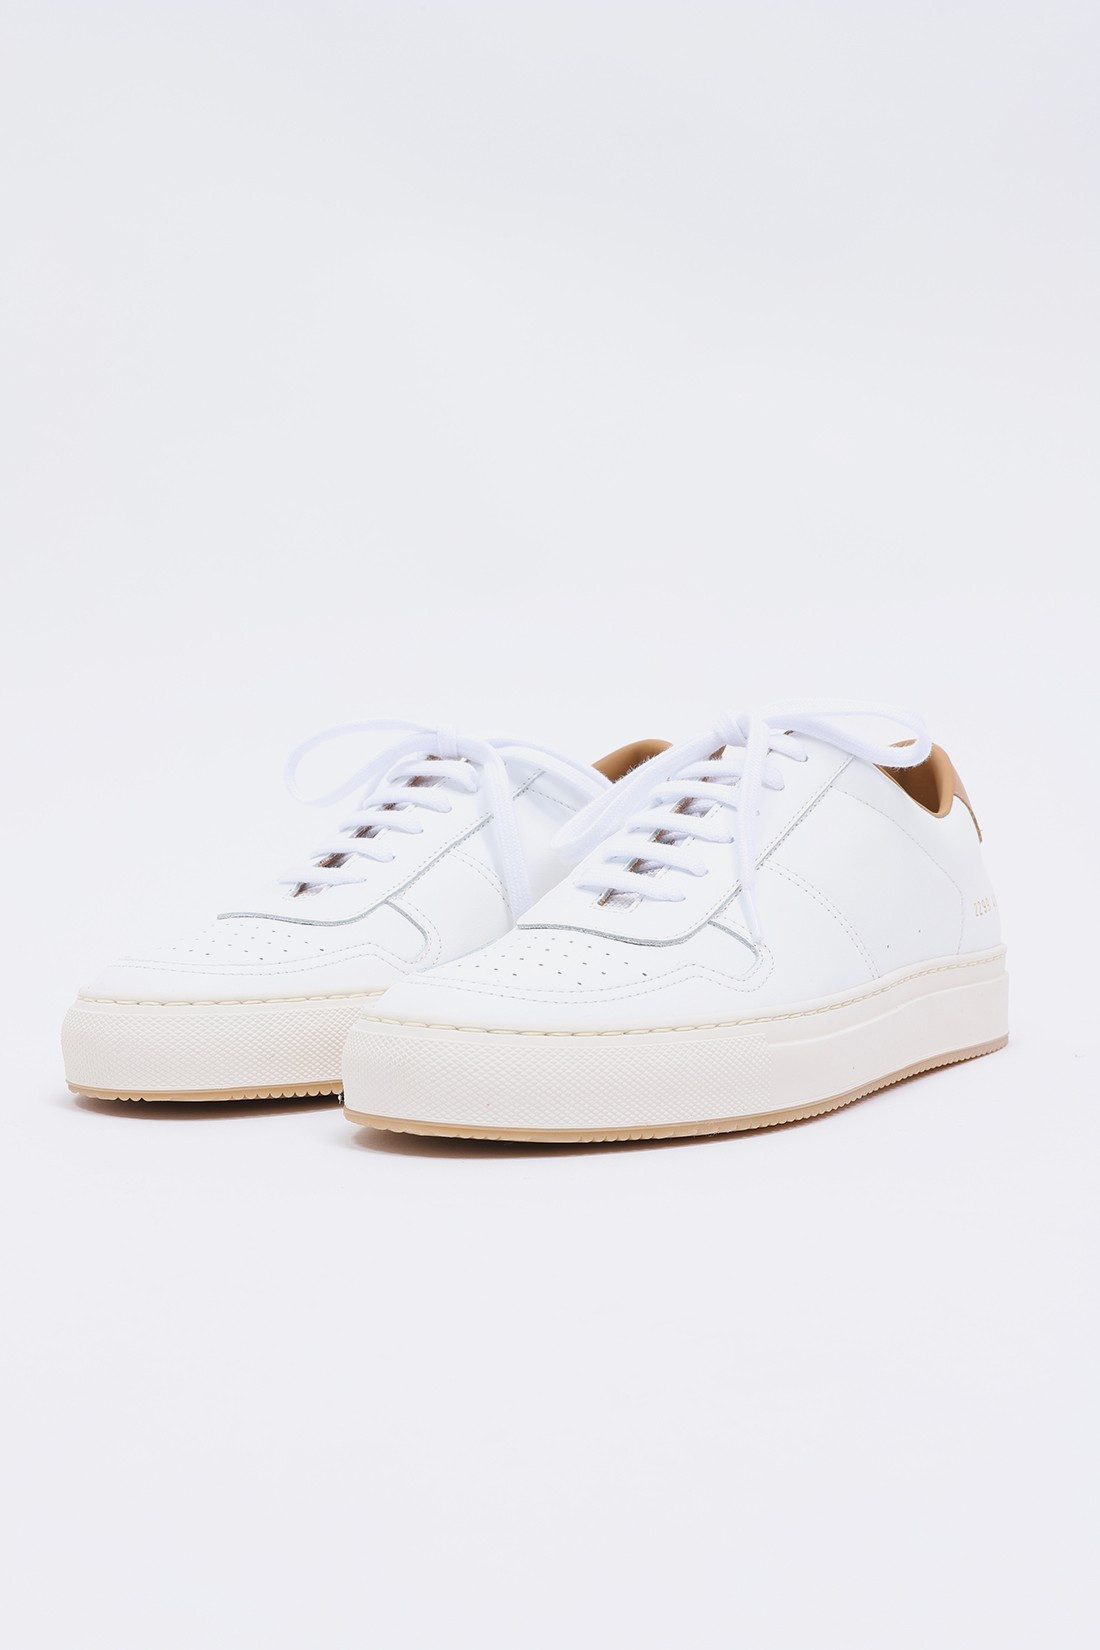 COMMON PROJECTS / Bball '90 2299 White/tan